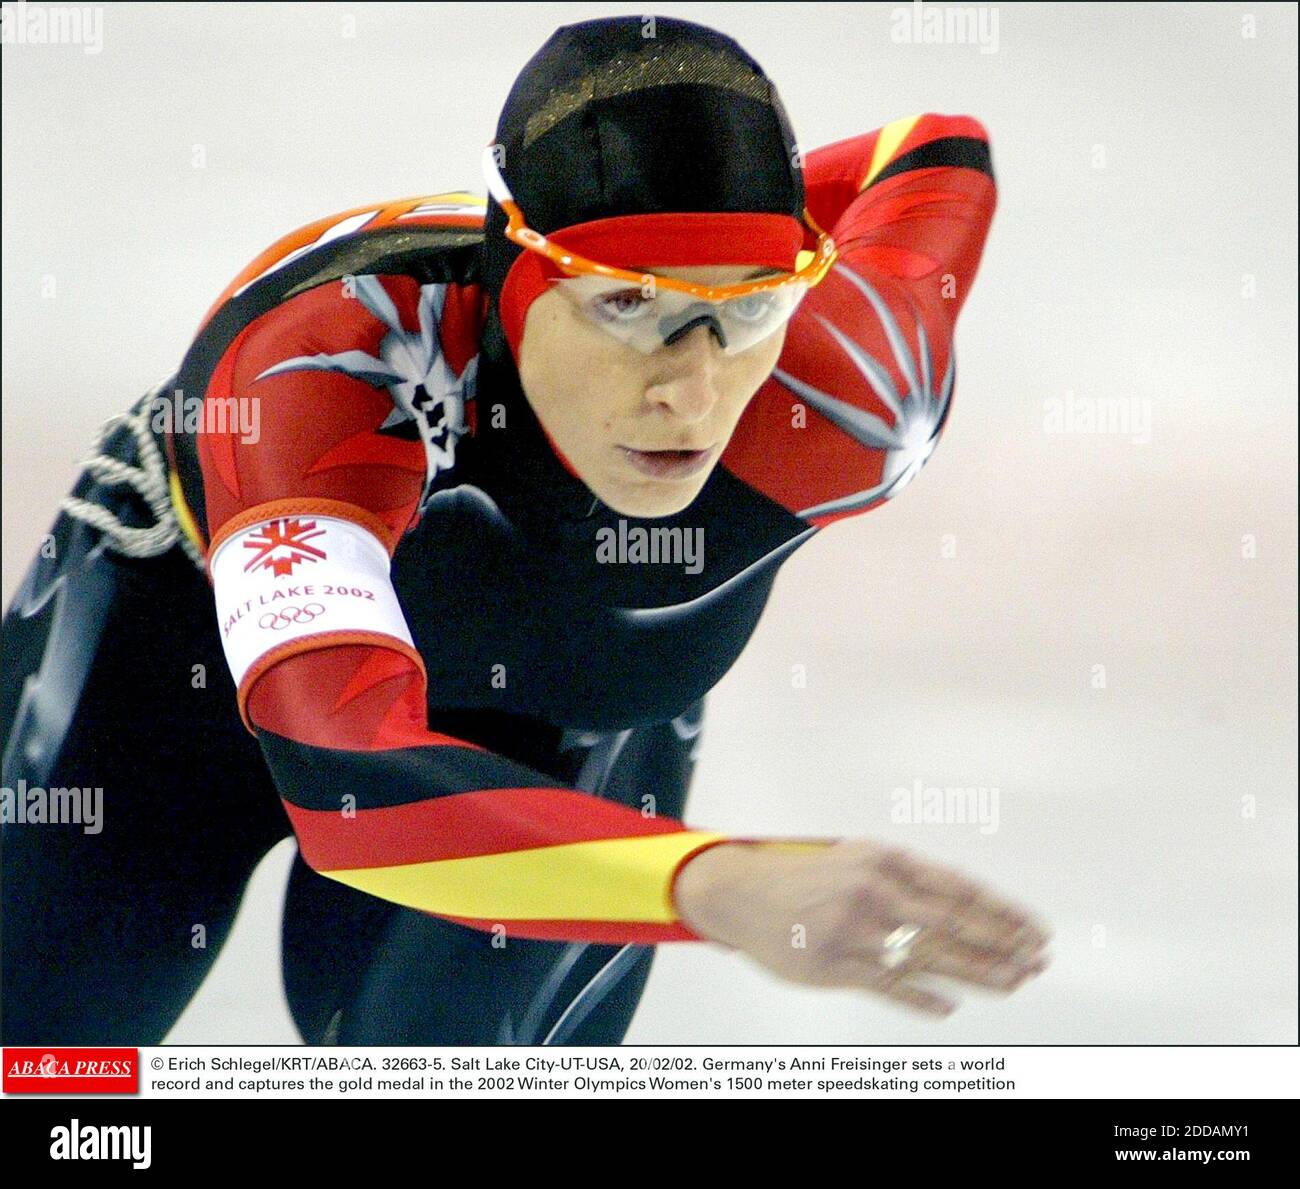 NO FILM, NO VIDEO, NO TV, NO DOCUMENTARY - © Erich Schlegel/KRT/ABACA. 32663-5. Salt Lake City-UT-USA, 20/02/02. Germany's Anni Freisinger sets a world record ans captures the gold medal in the 2002 Winter Olympics Women's 1500 meter speedskating competition Stock Photo